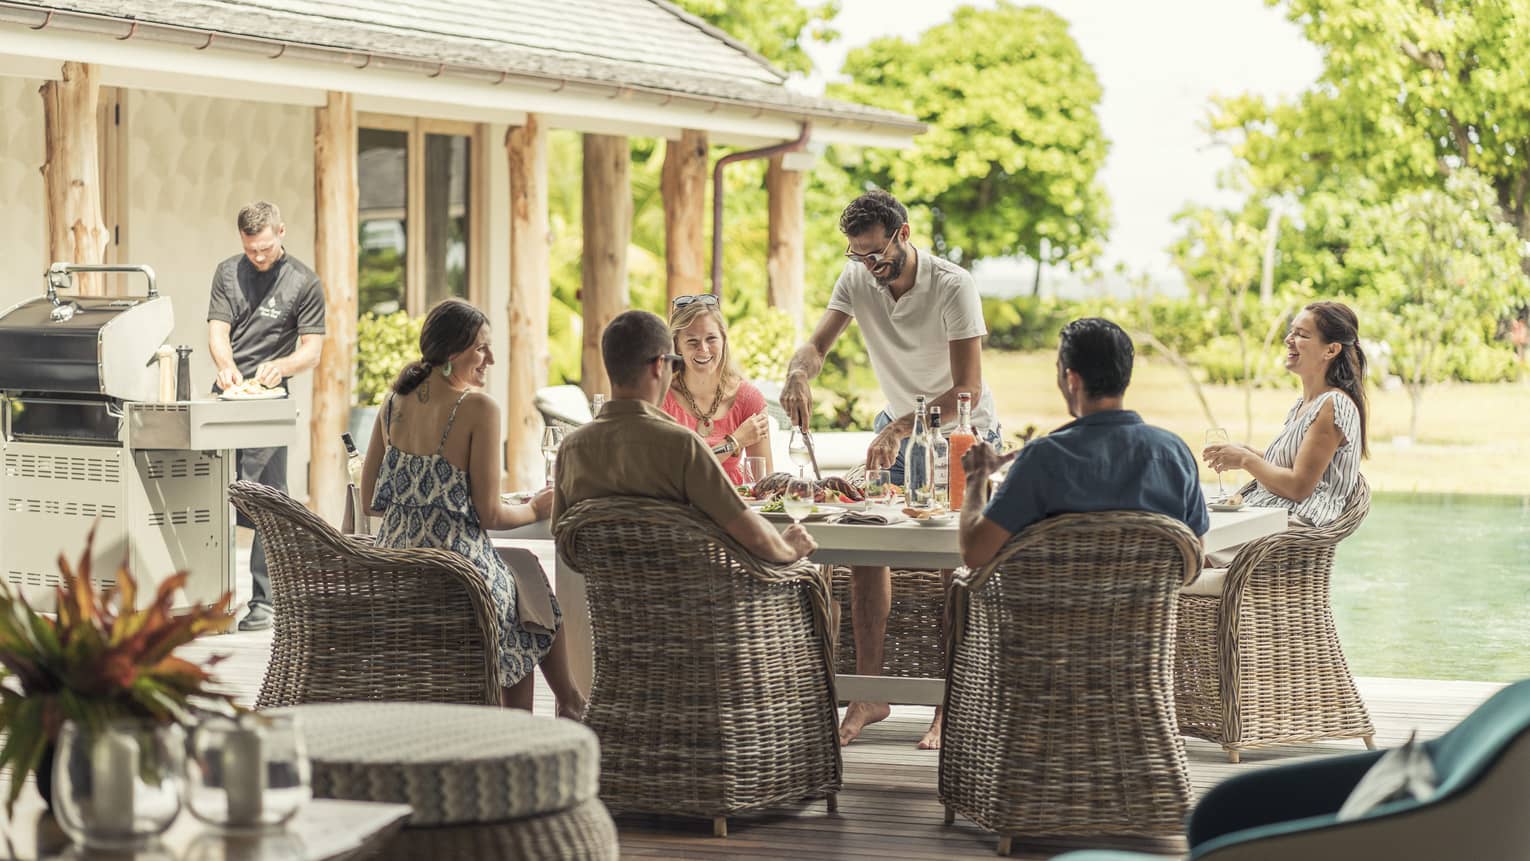 Five people seated poolside with staff member service and chef at grill